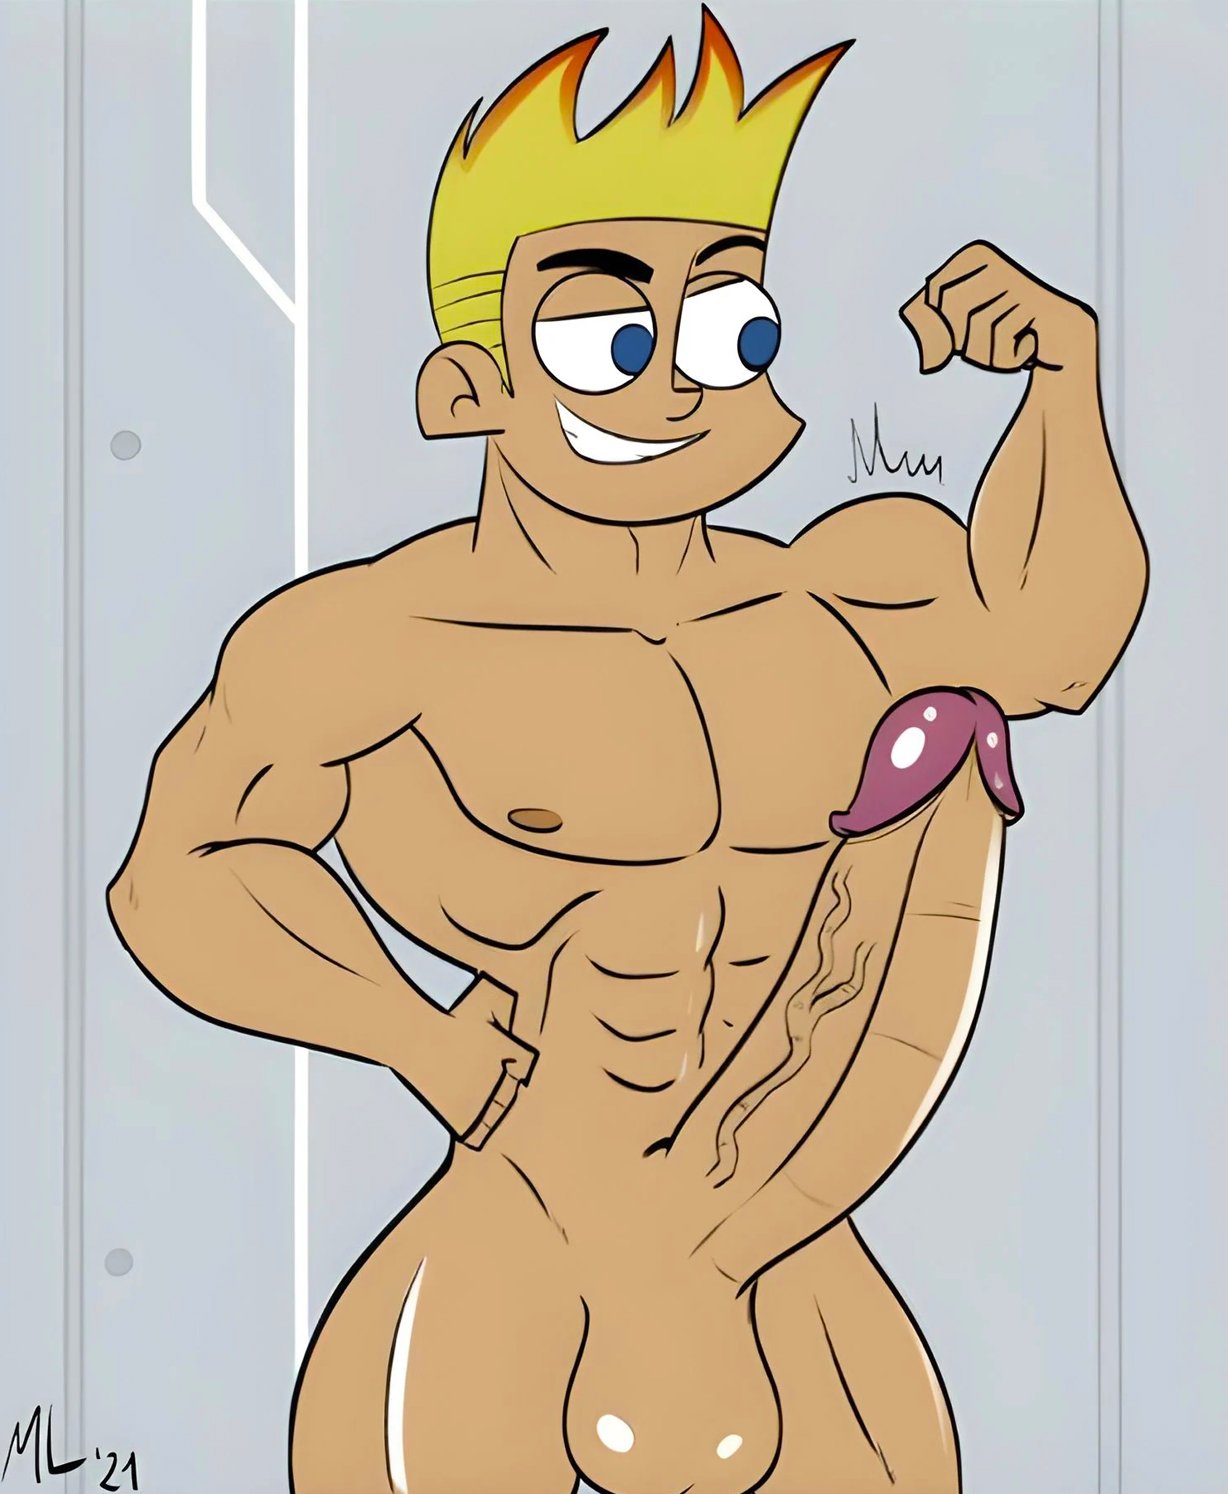 Ameizing Lewds â€“ Test Subjects (Johnny Test) | Top Hentai Comics